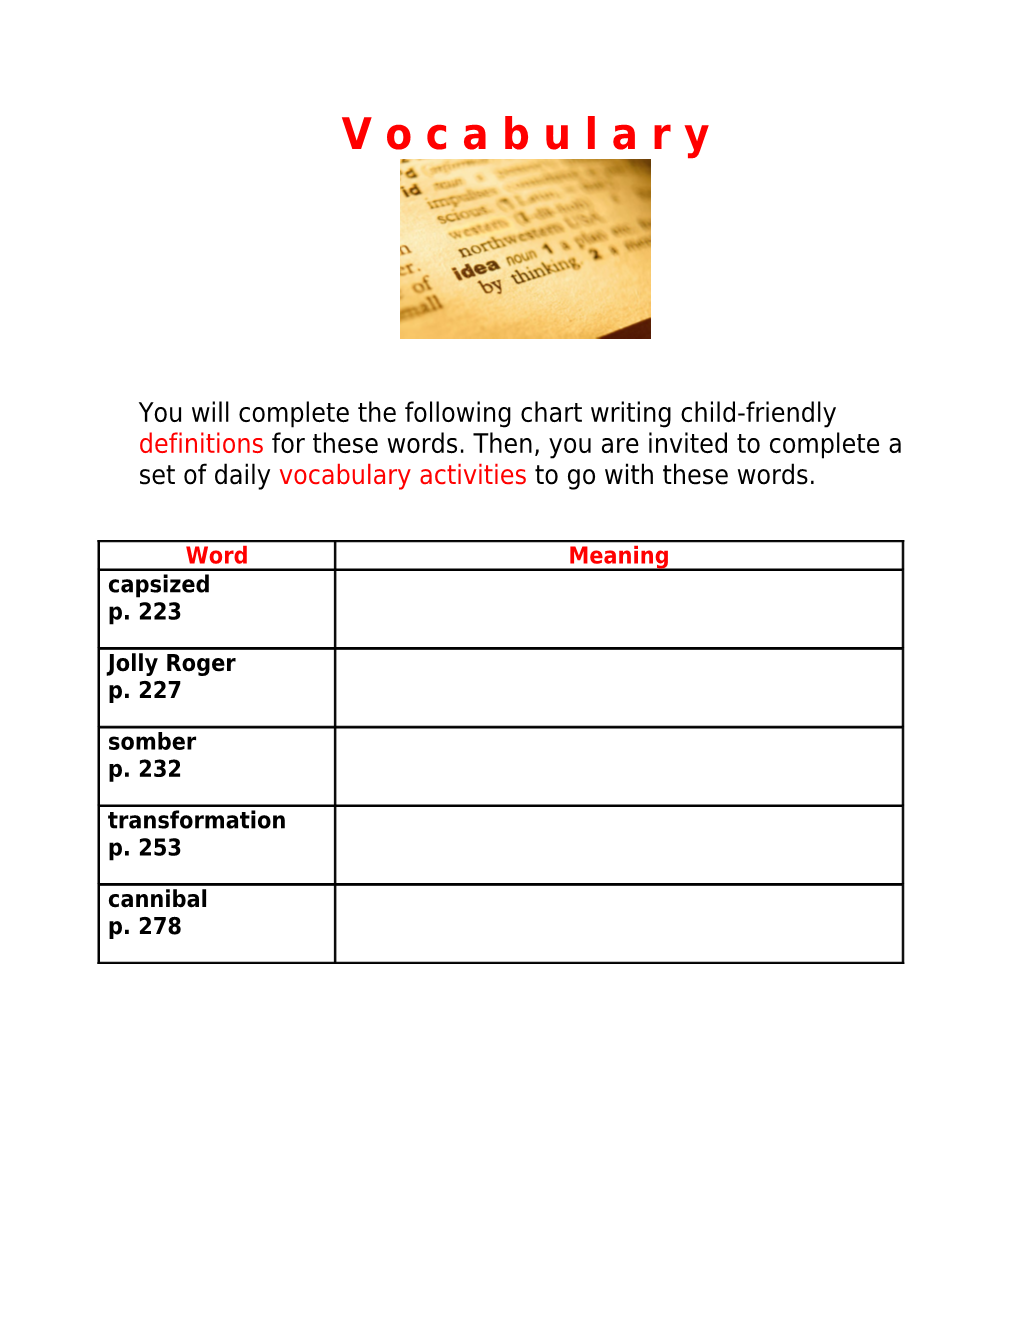 You Will Complete the Following Chart Writing Child-Friendly Definitions for These Words